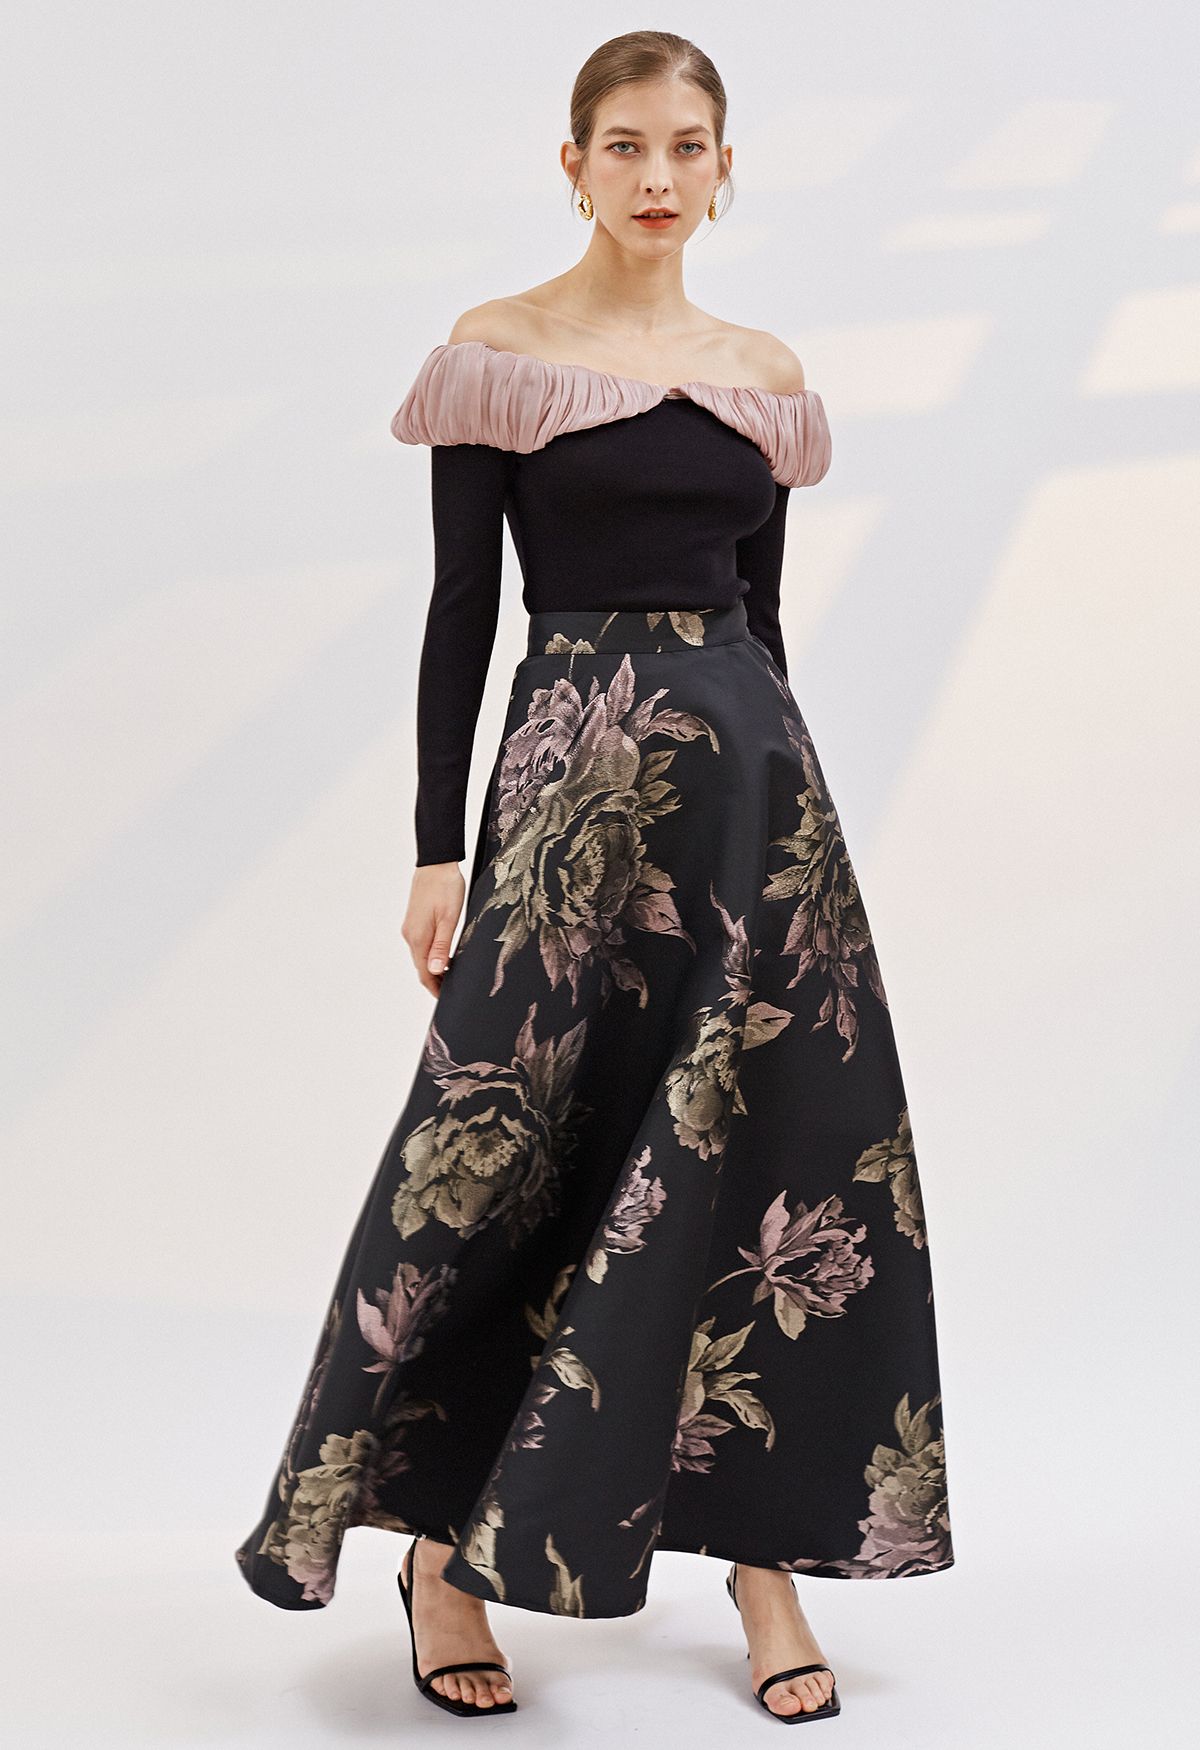 Glittery Peony Jacquard Maxi Skirt in Black - Retro, Indie and Unique ...